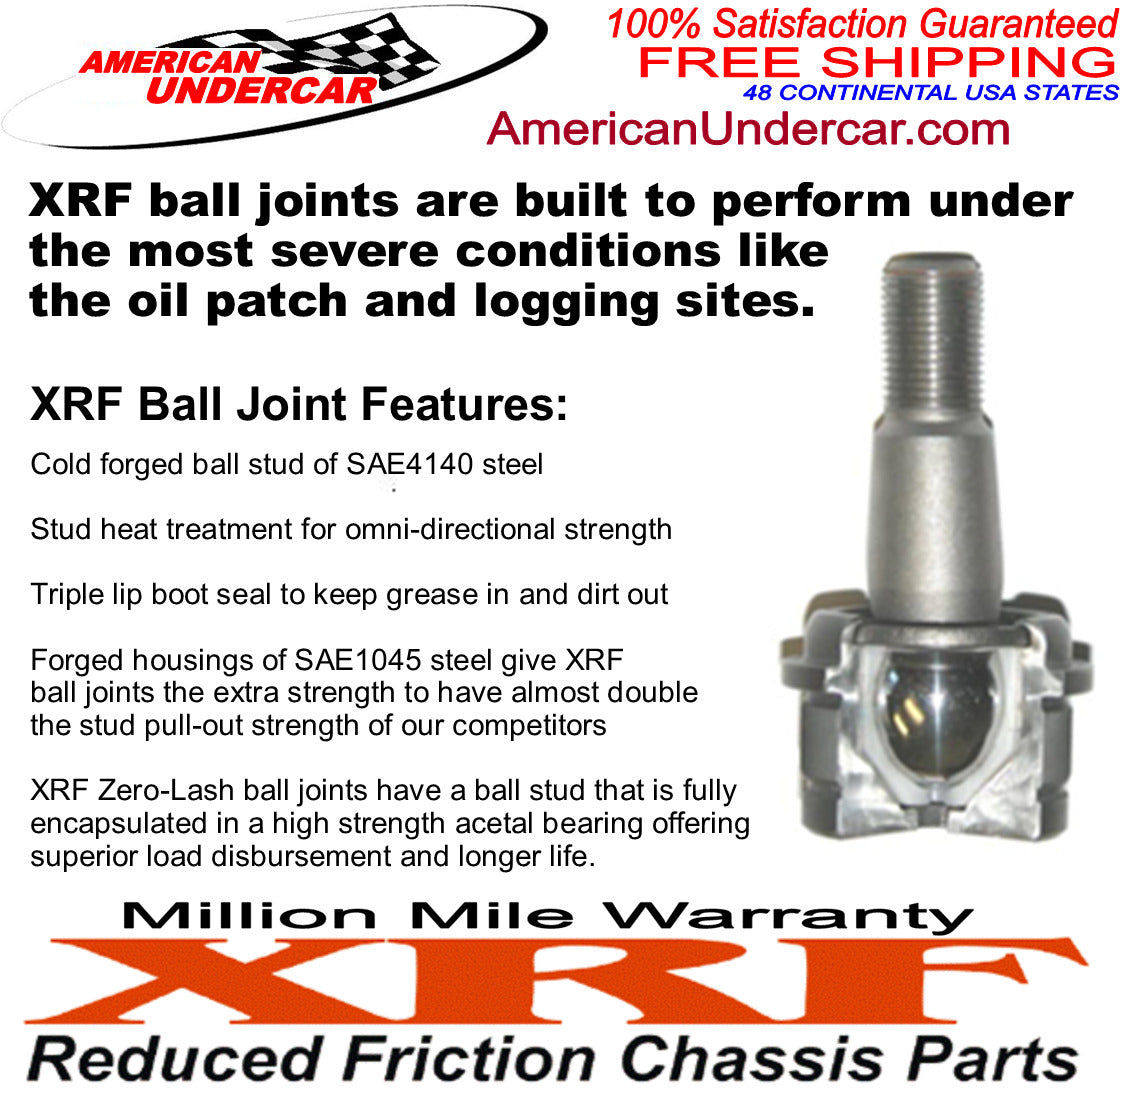 XRF Ball Joint Tie Rod Drag Link Sleeve Kit for 2005-2007 Ford F250, F350 Super Duty 4x4